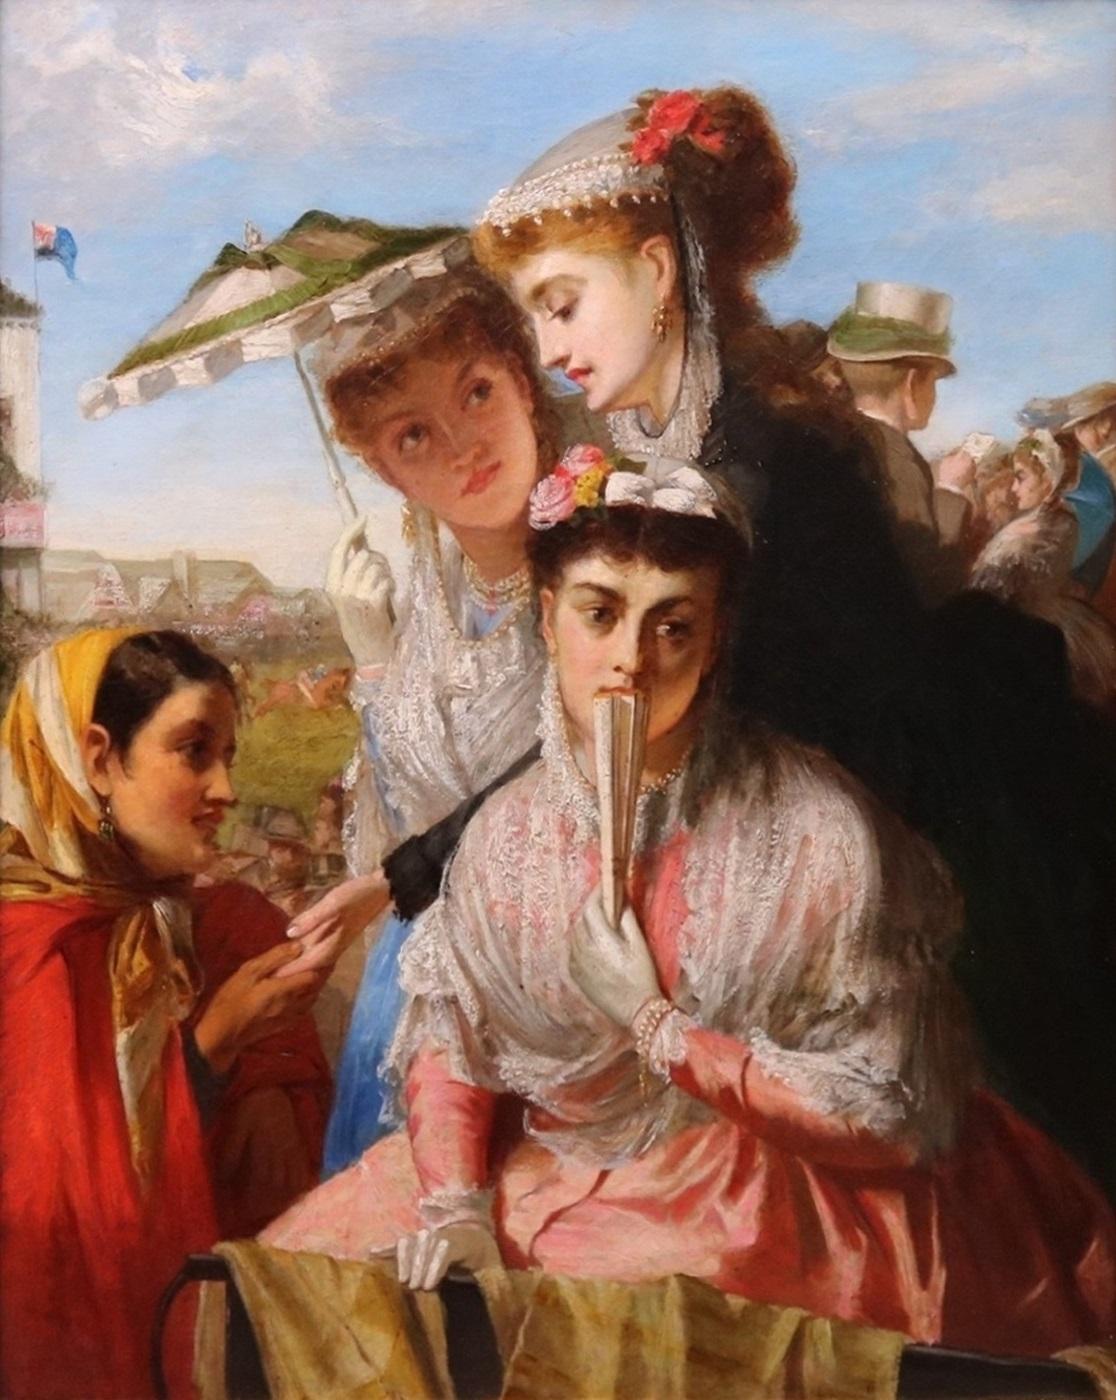 ‘Our Party at the Oaks’ by William Holyoake R.B.A. (1834-1894). The painting – which depicts a group of young ladies at the famous English horse race at Epsom Downs - was exhibited at the Royal Society of British Artists in 1867. It is presented in